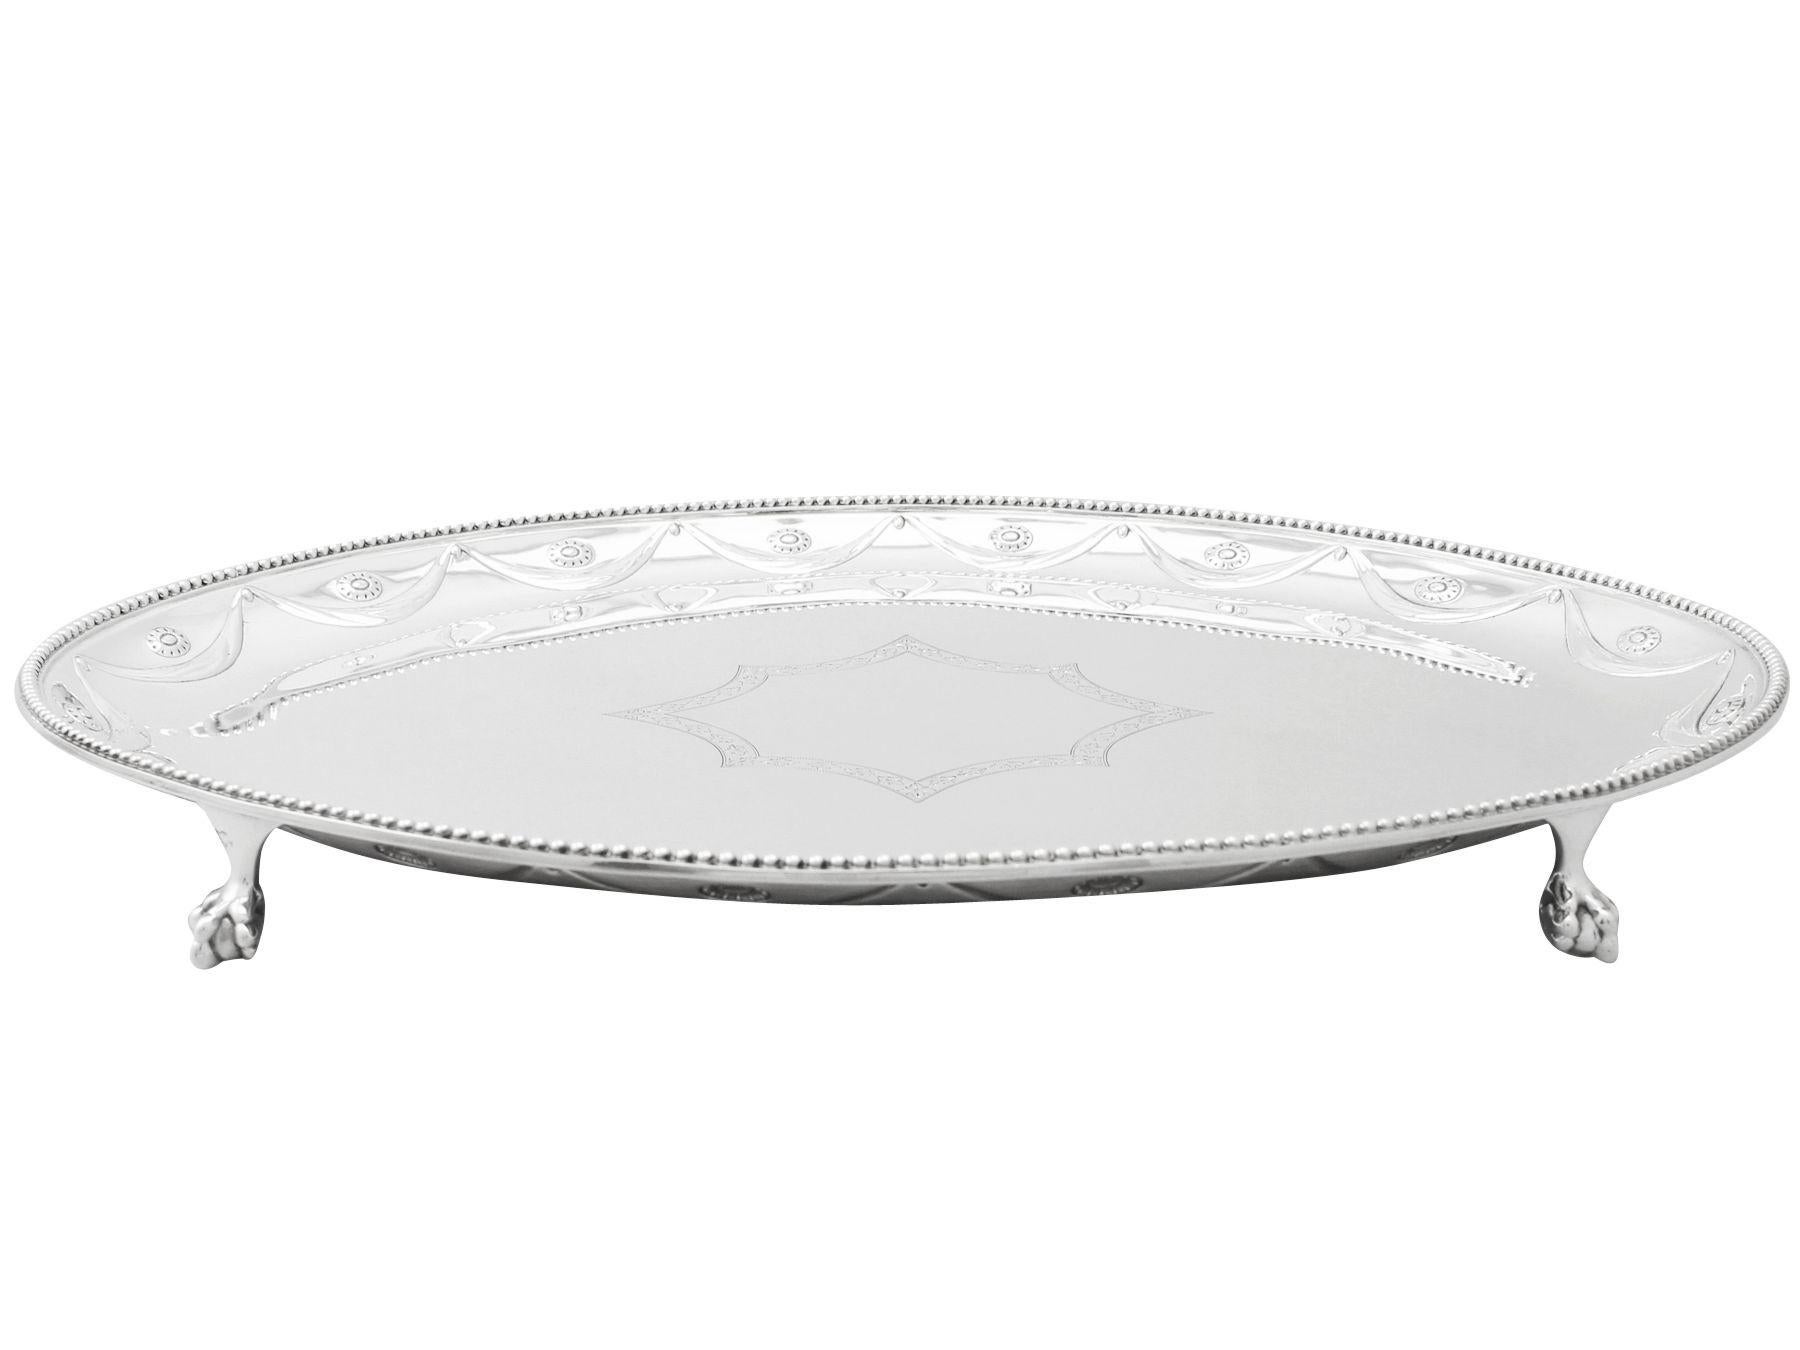 An exceptional, fine and impressive antique Victorian English sterling silver salver made by Walter & John Barnard, an addition to our ornamental silverware collection.

This exceptional antique sterling silver salver has a plain oval form.

The